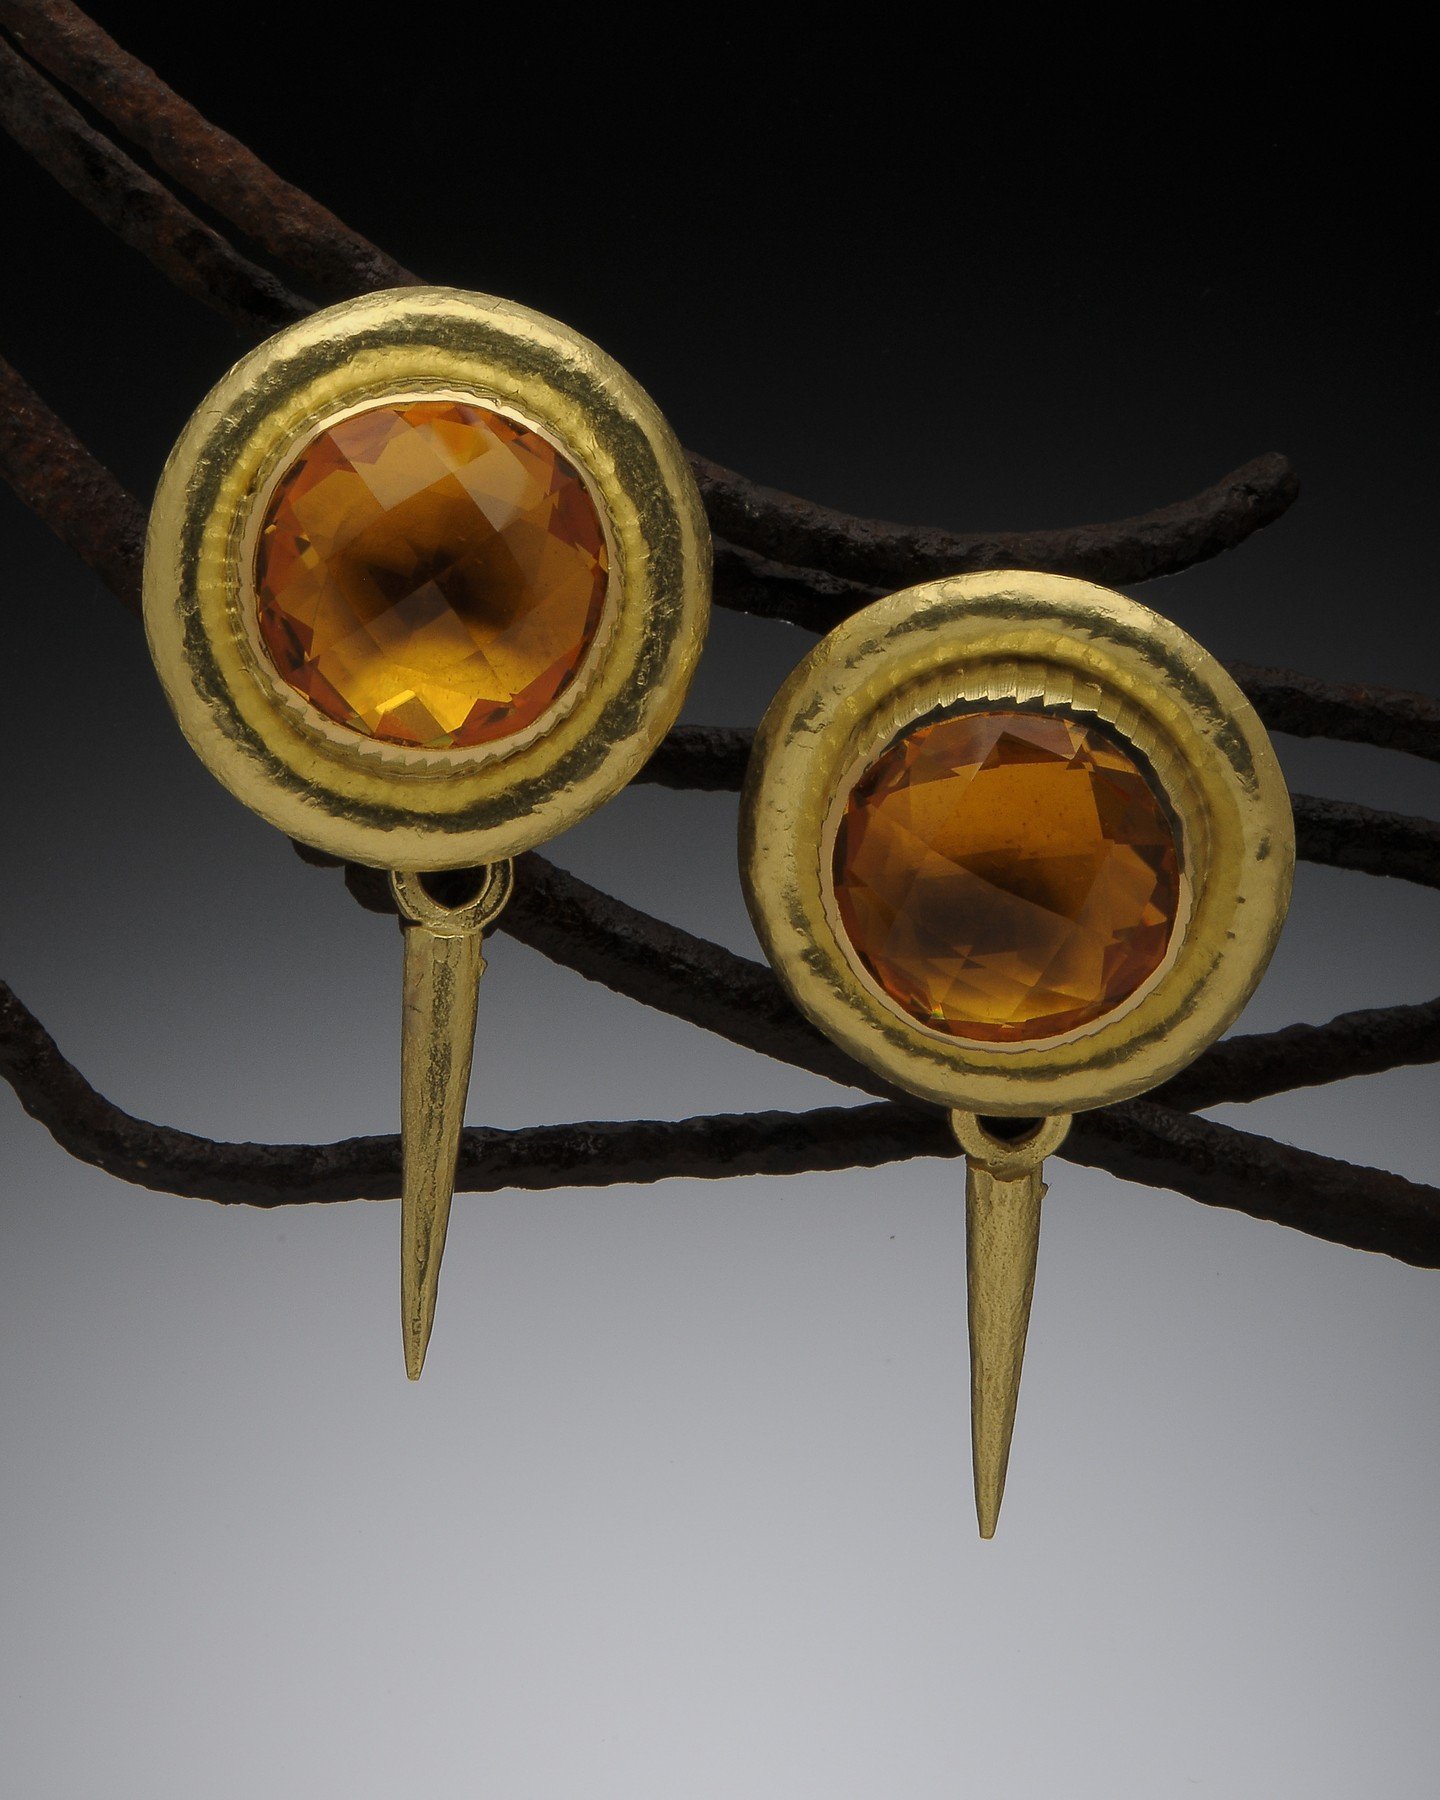 Radiating warmth like the sun itself these Citrine cabochon earrings will brighten your day! Shown with optional earring drops. Hughes Bosca now open on Sundays! www.hughesbosca.com
#citrine #citrinecabochon #citrineearrings #cabochonearrings #facete